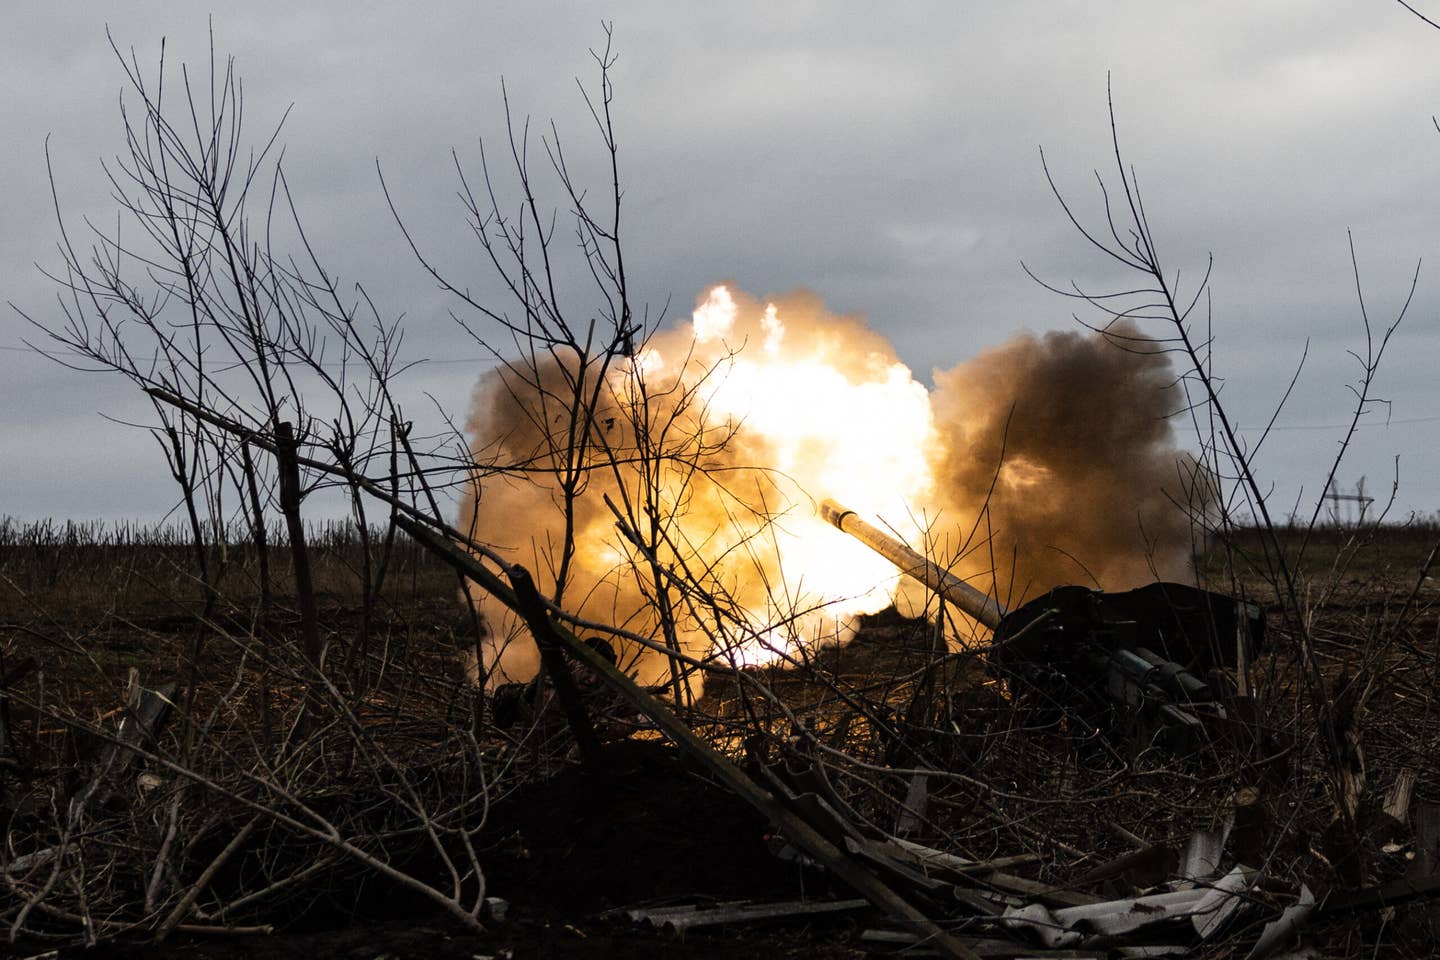 Ukrainian artillery fires toward Russian positions on the outskirts of Bakhmut in Donetsk Oblast. (Photo by Sameer Al-DOUMY / AFP) (Photo by SAMEER AL-DOUMY/AFP via Getty Images)